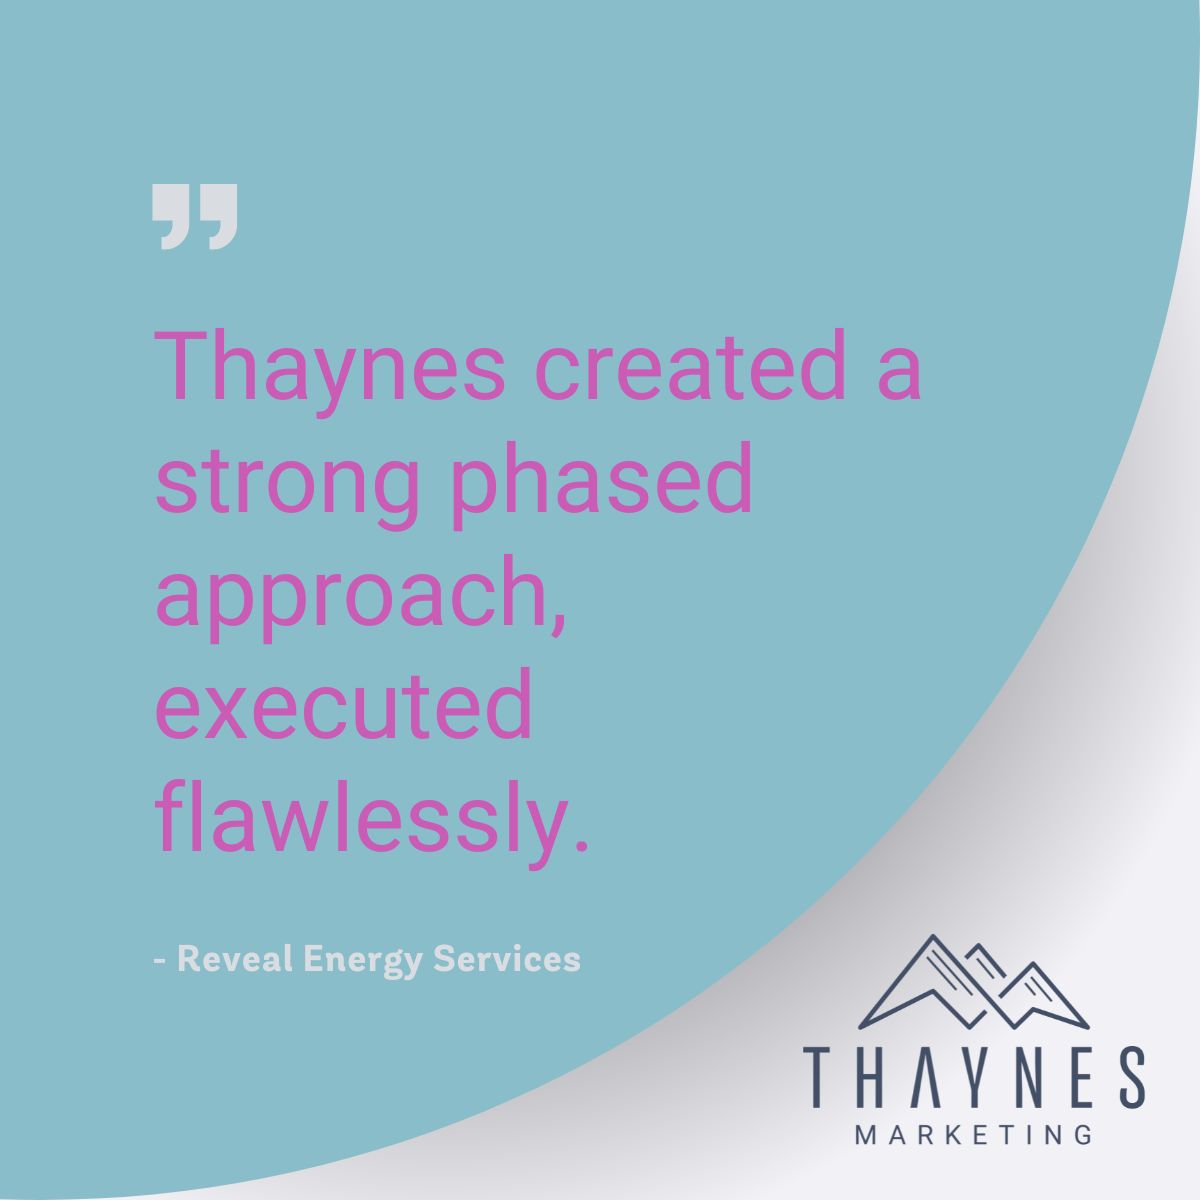 Reveal Energy Services gained $2 million in new pipeline and saw a campaign ROI of 875% in just less than 120 days thanks to Thaynes. Learn more the road to success here: hubs.ly/Q01TjZwl0 

#energytech #b2b